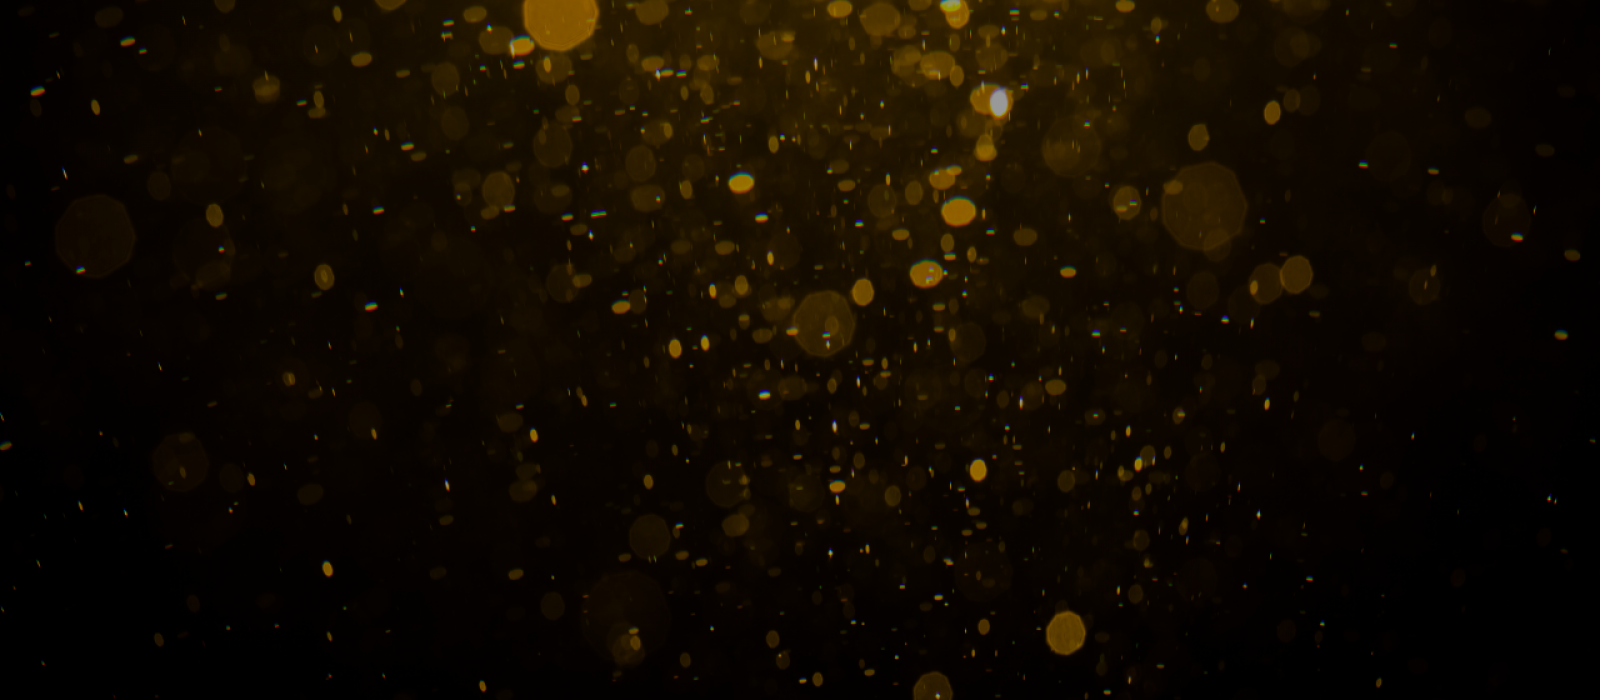 Gold dust falling on black background.